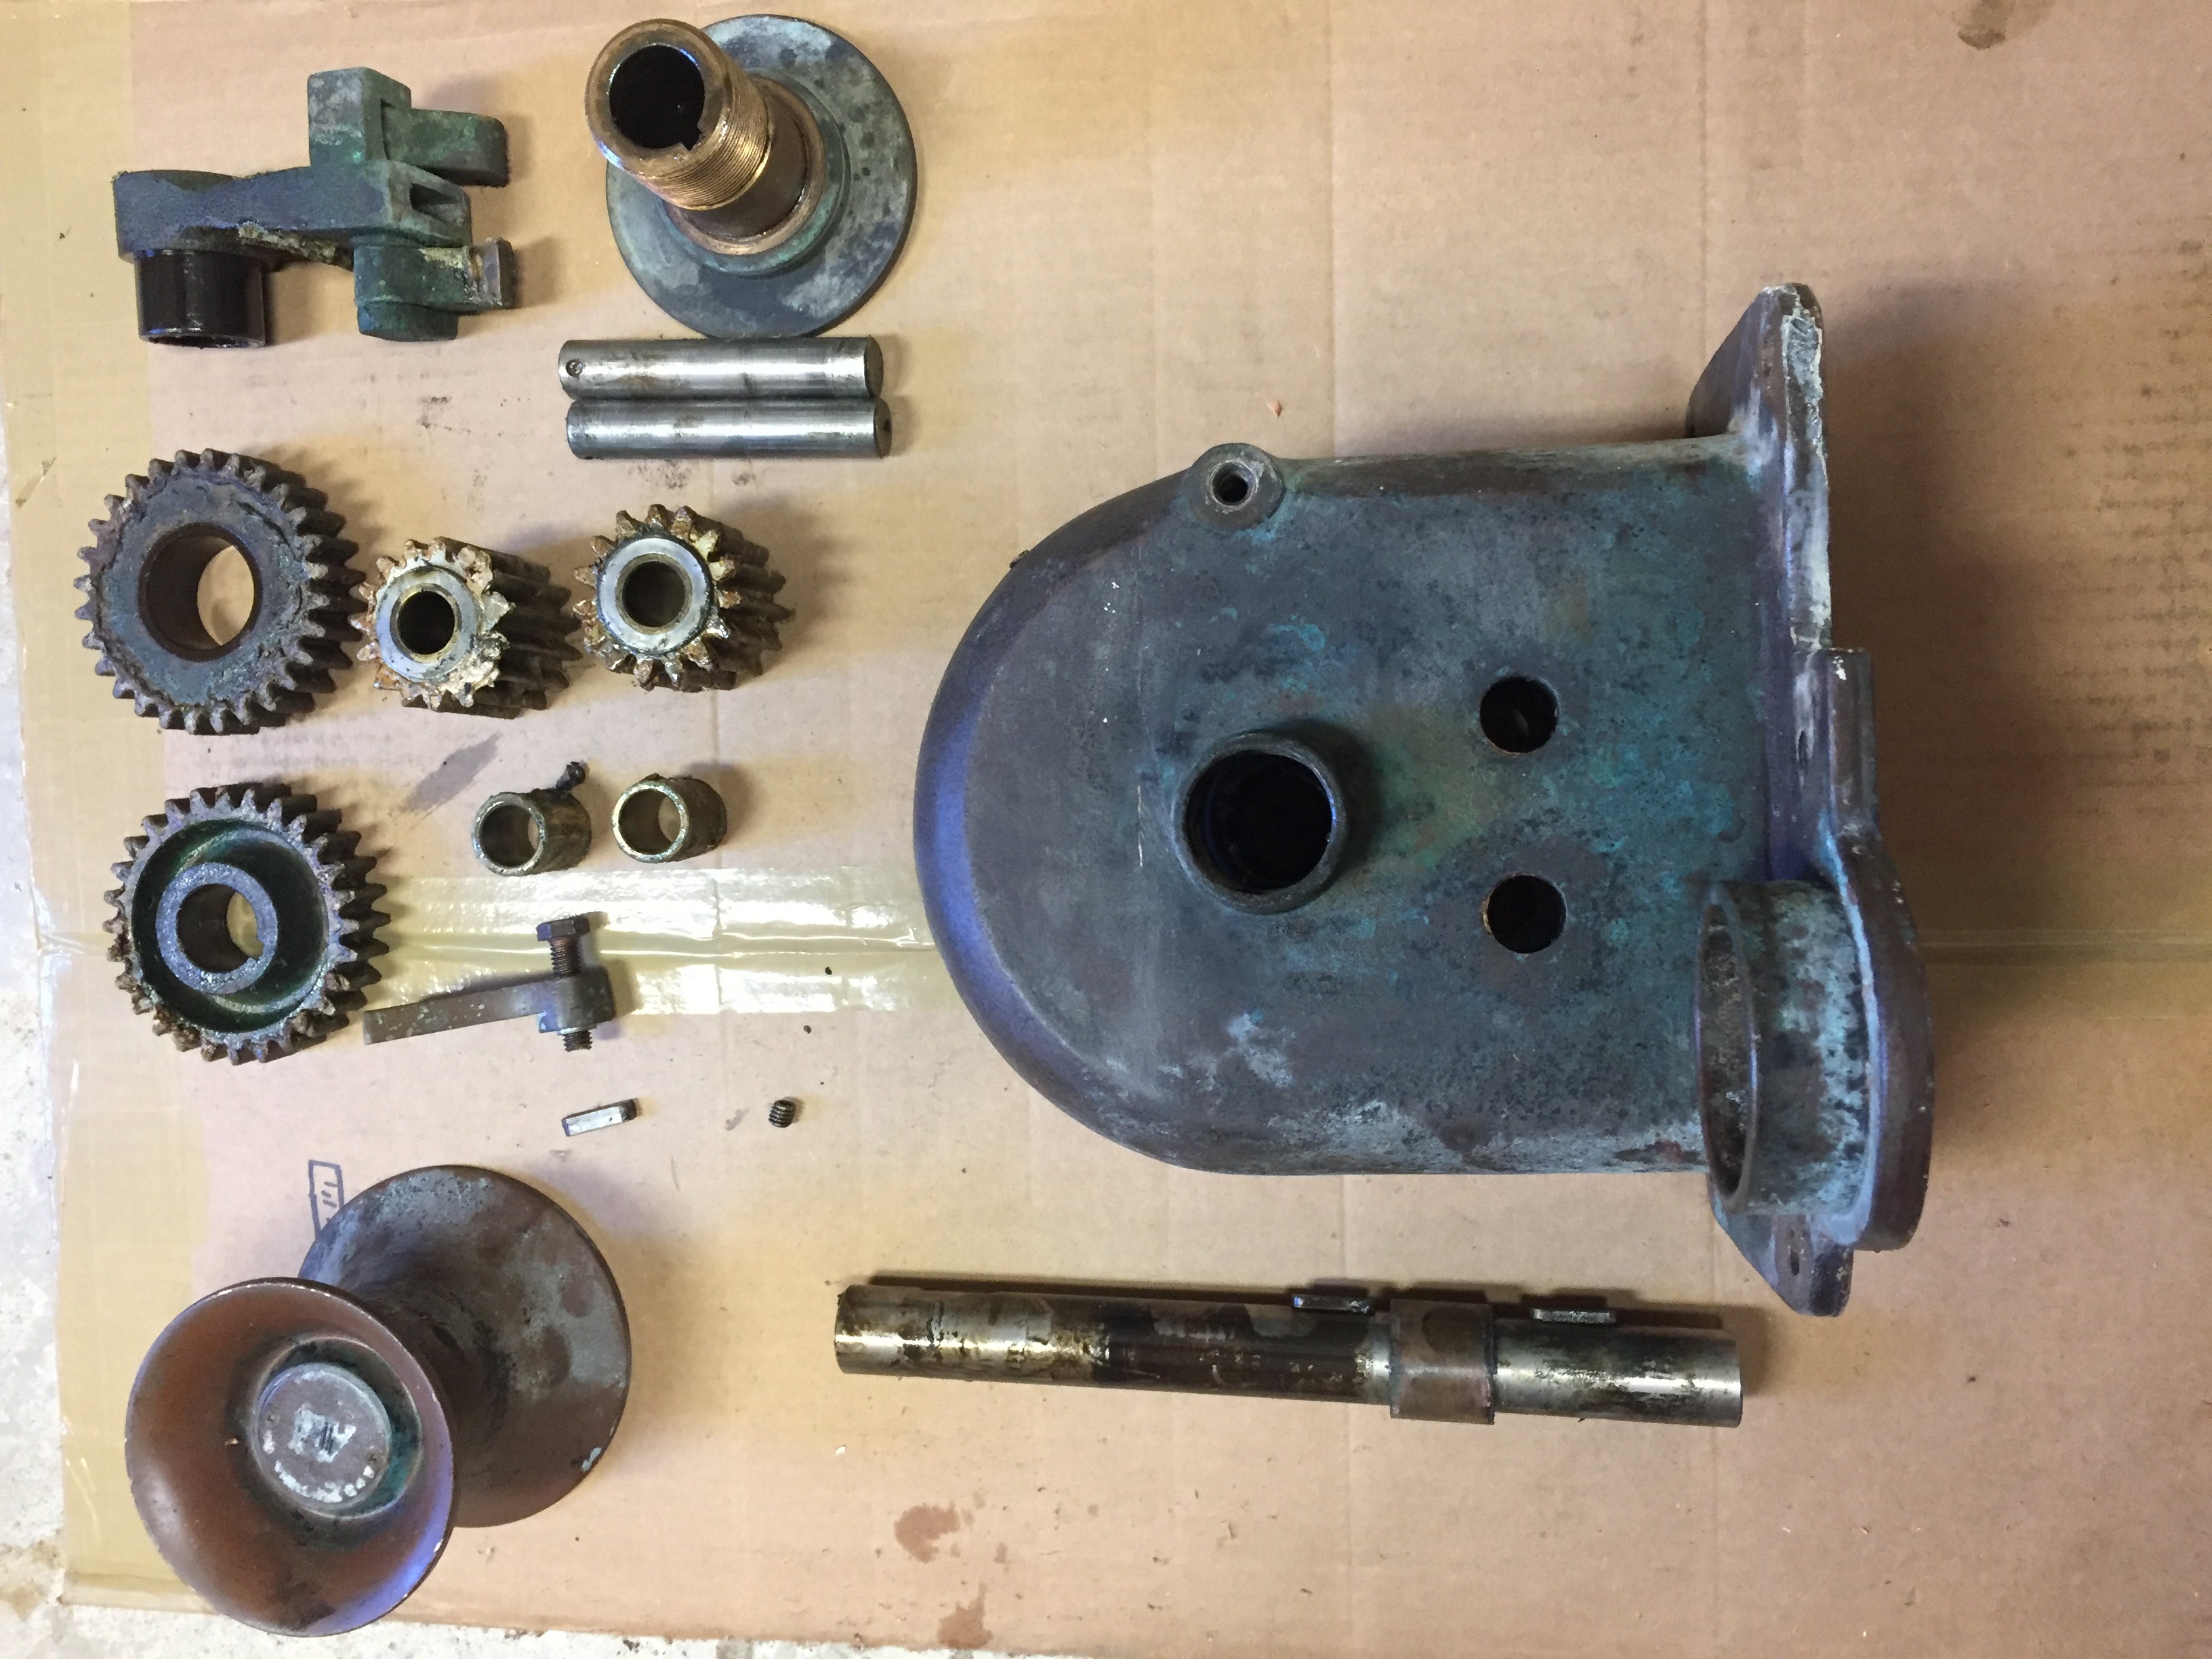 ABI double action bronze windlass disassembled and ready for cleaning.